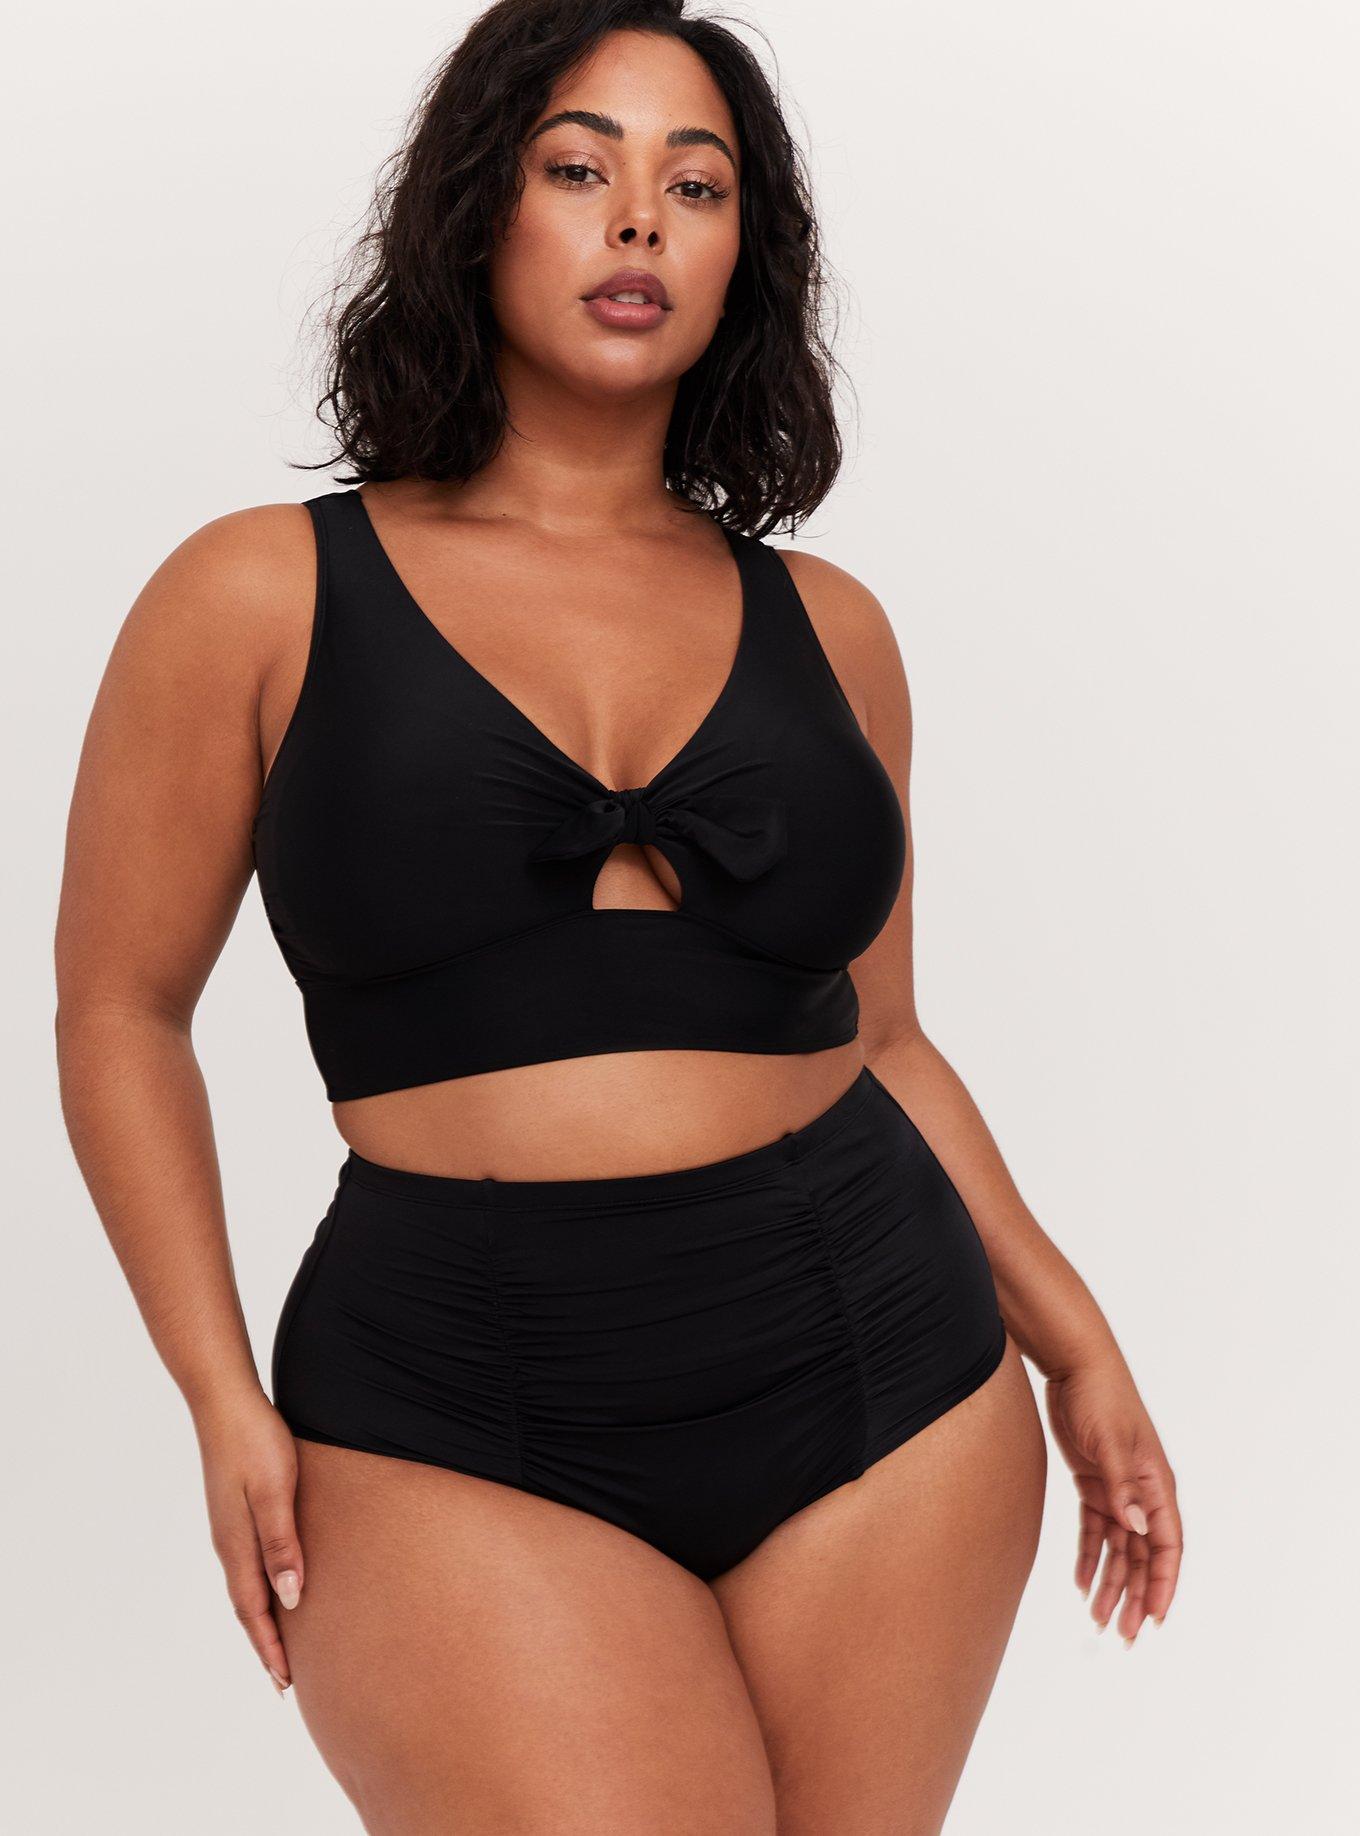 try on my torrid order with me ! for reference im a 6x/30 :) Plus size